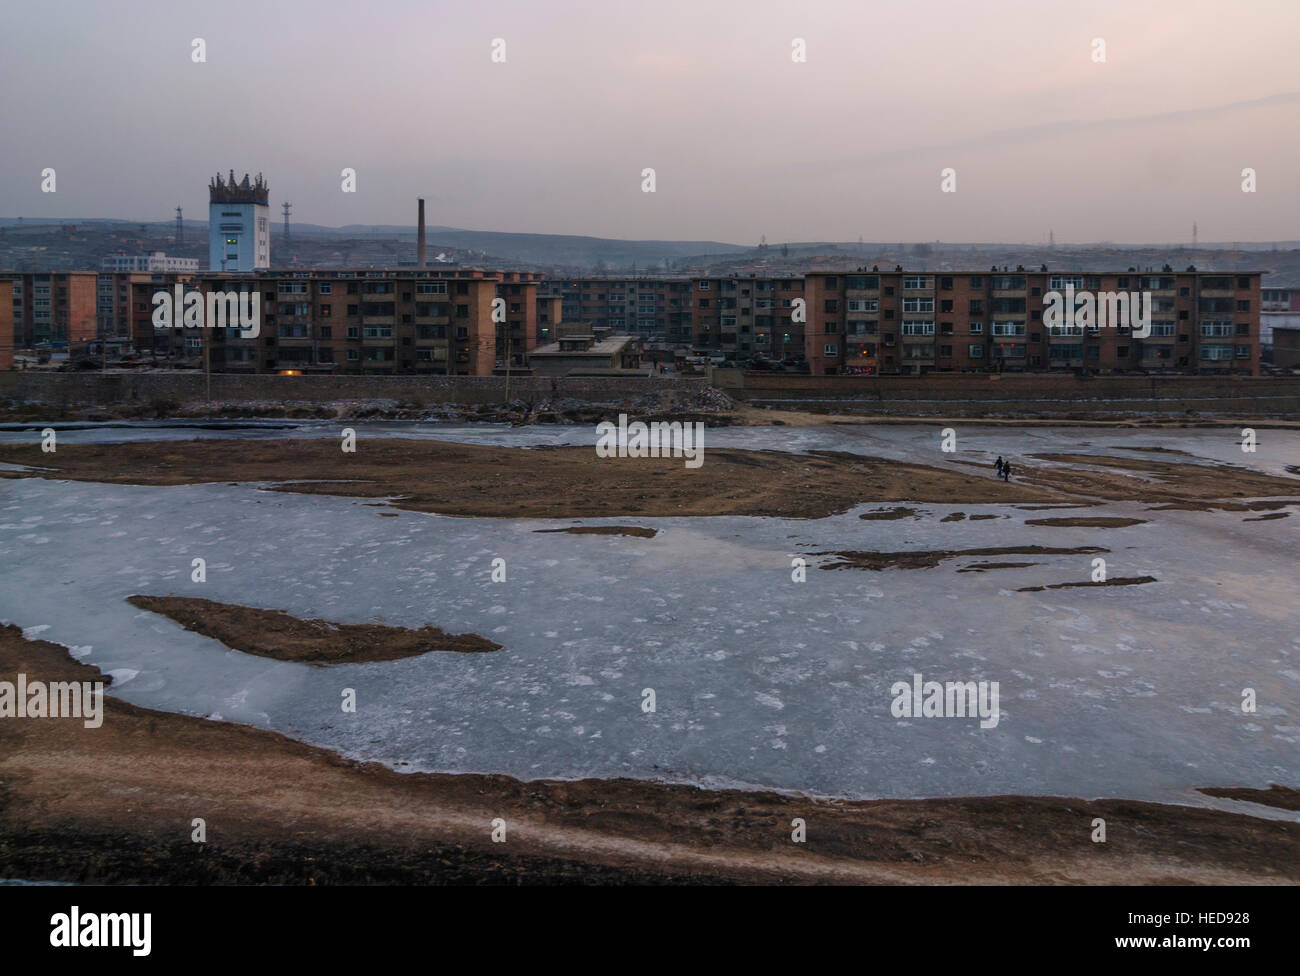 Datong: Datong coal mine; Conveyor tower and residential buildings on a frozen river, Shanxi, China Stock Photo